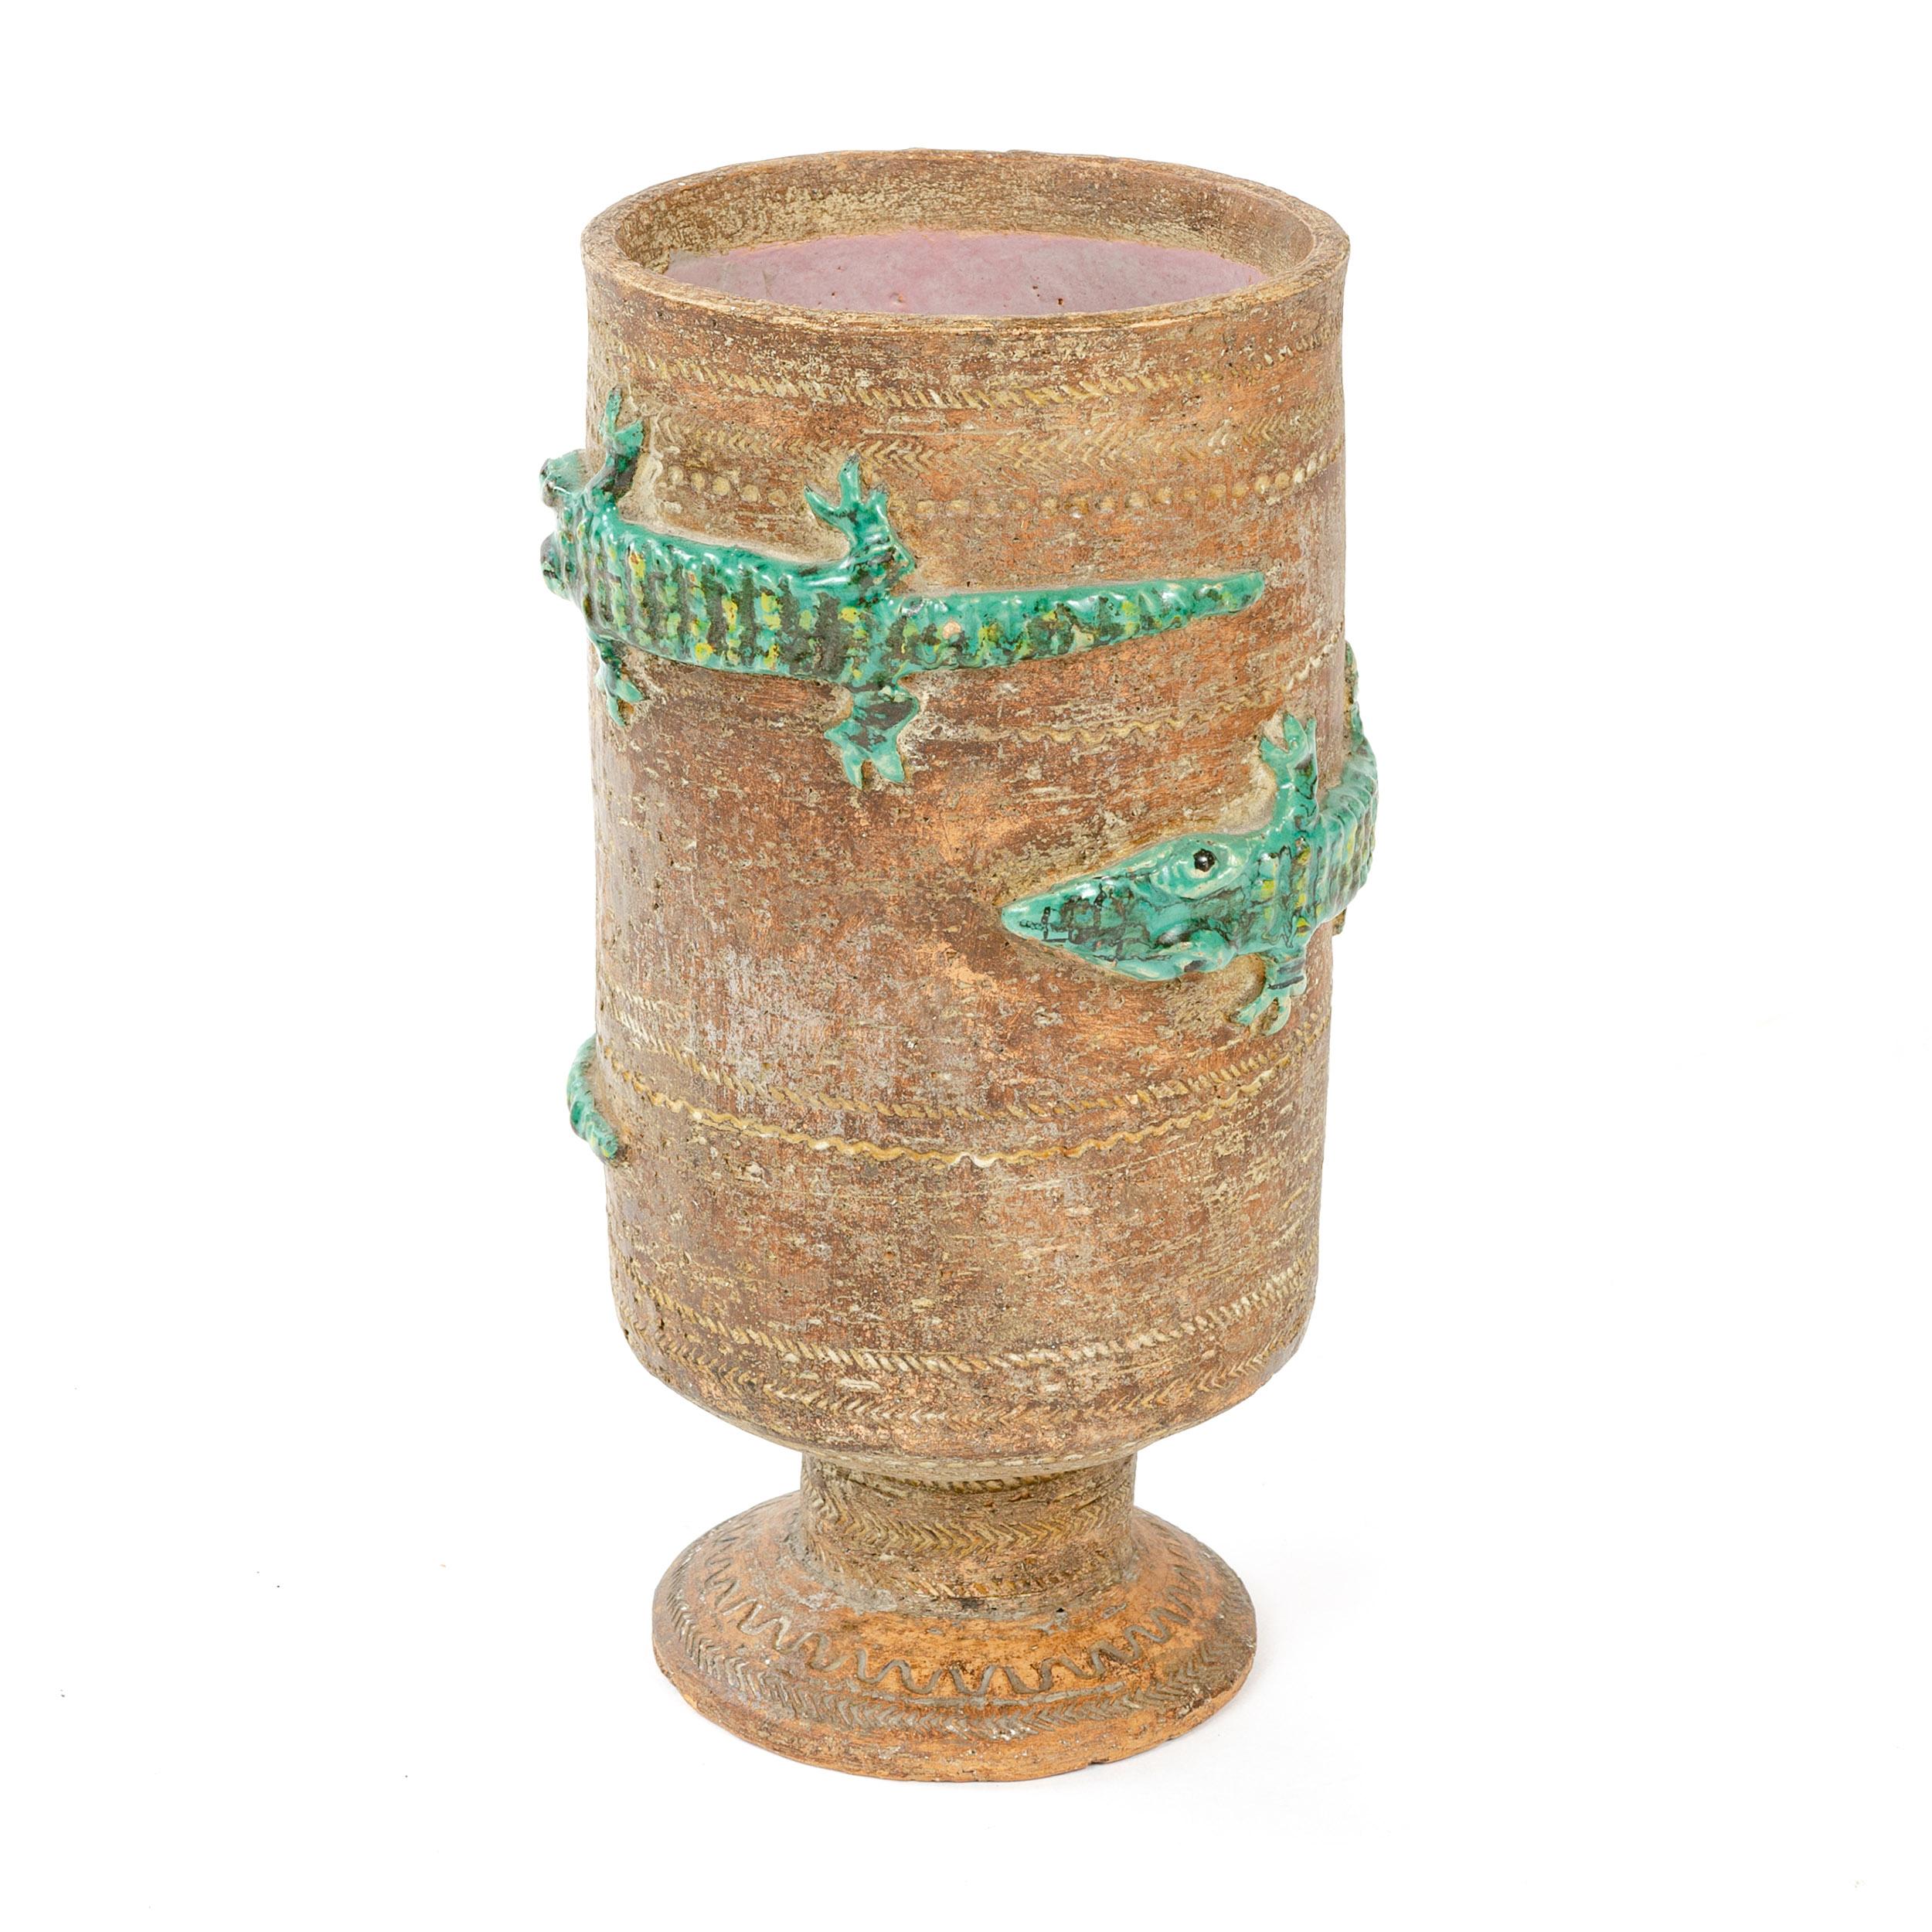 Tall, footed earth tone pottery vase with a rough, tactile surface treatment having raised alligators in a contrasting gloss green glaze ringing the upper body. Marked on its underside with the upper case initials 'D' and 'G' in gold lettering. Very